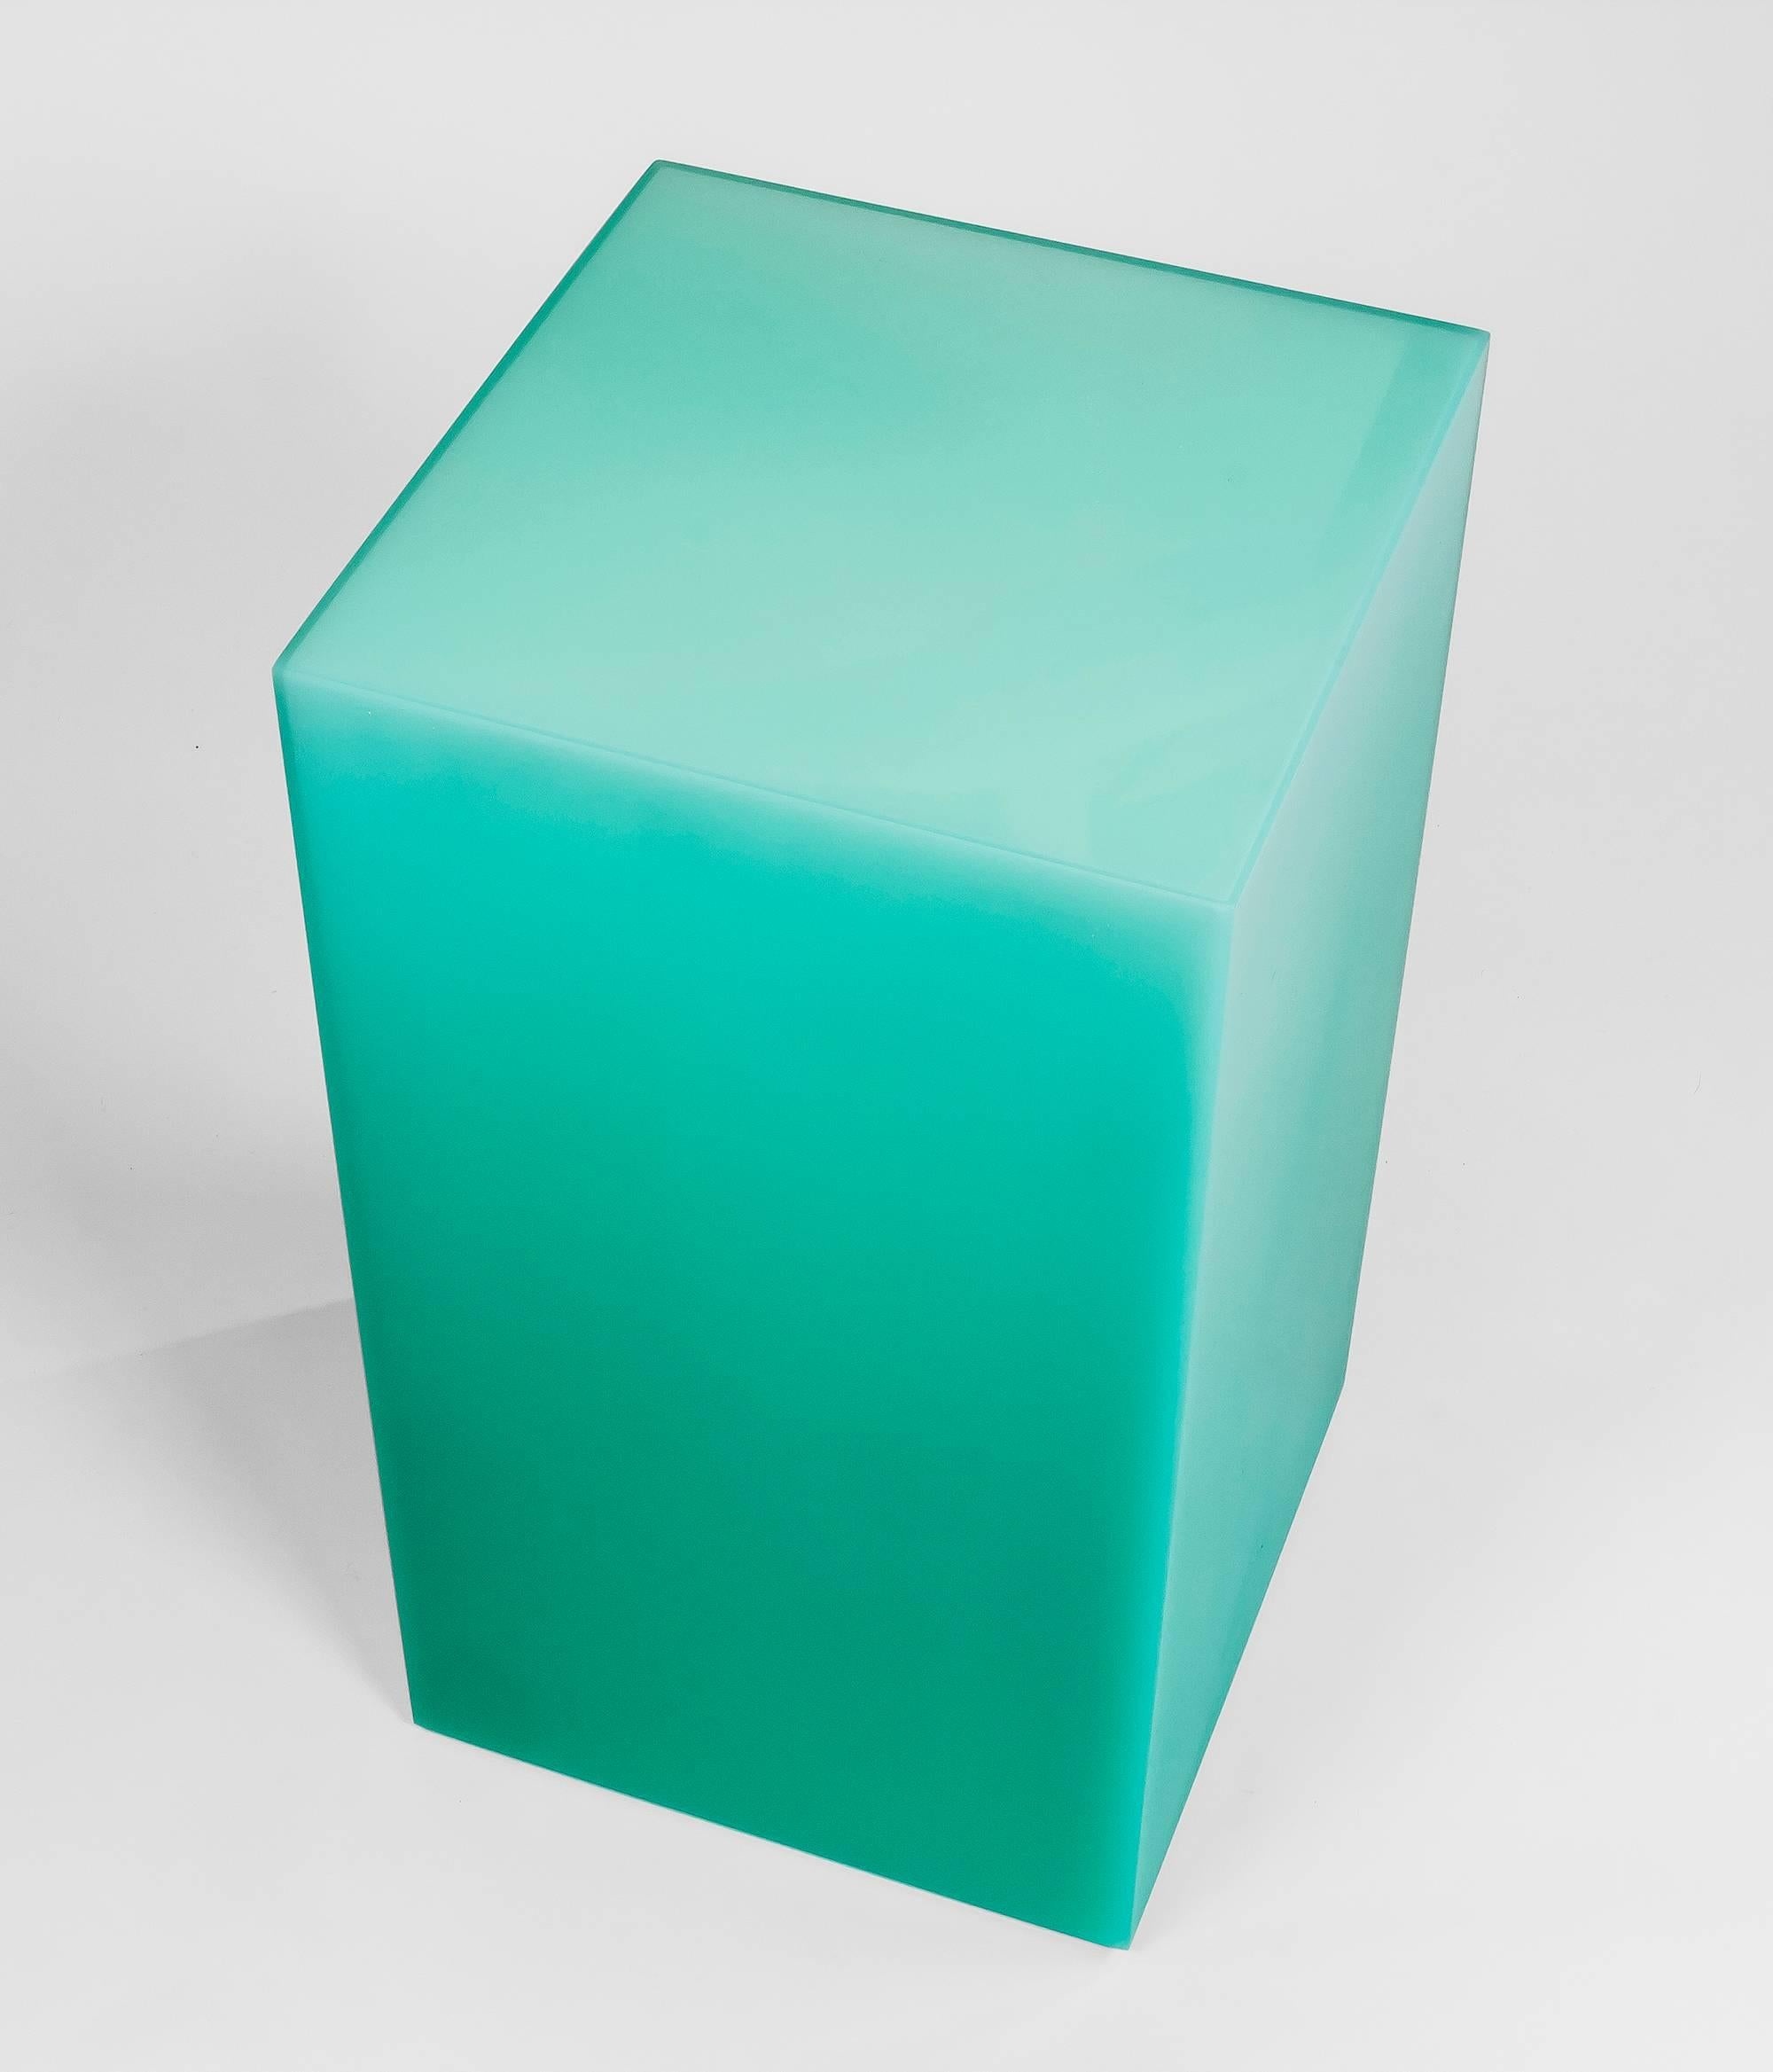 This stool / side table uses Facture Studio's Shift style to transition seamlessly from a deep opaque to water clear green over a white core. The exterior facets are sanded to a buttery smooth finish. This stool plays with light and transparency to